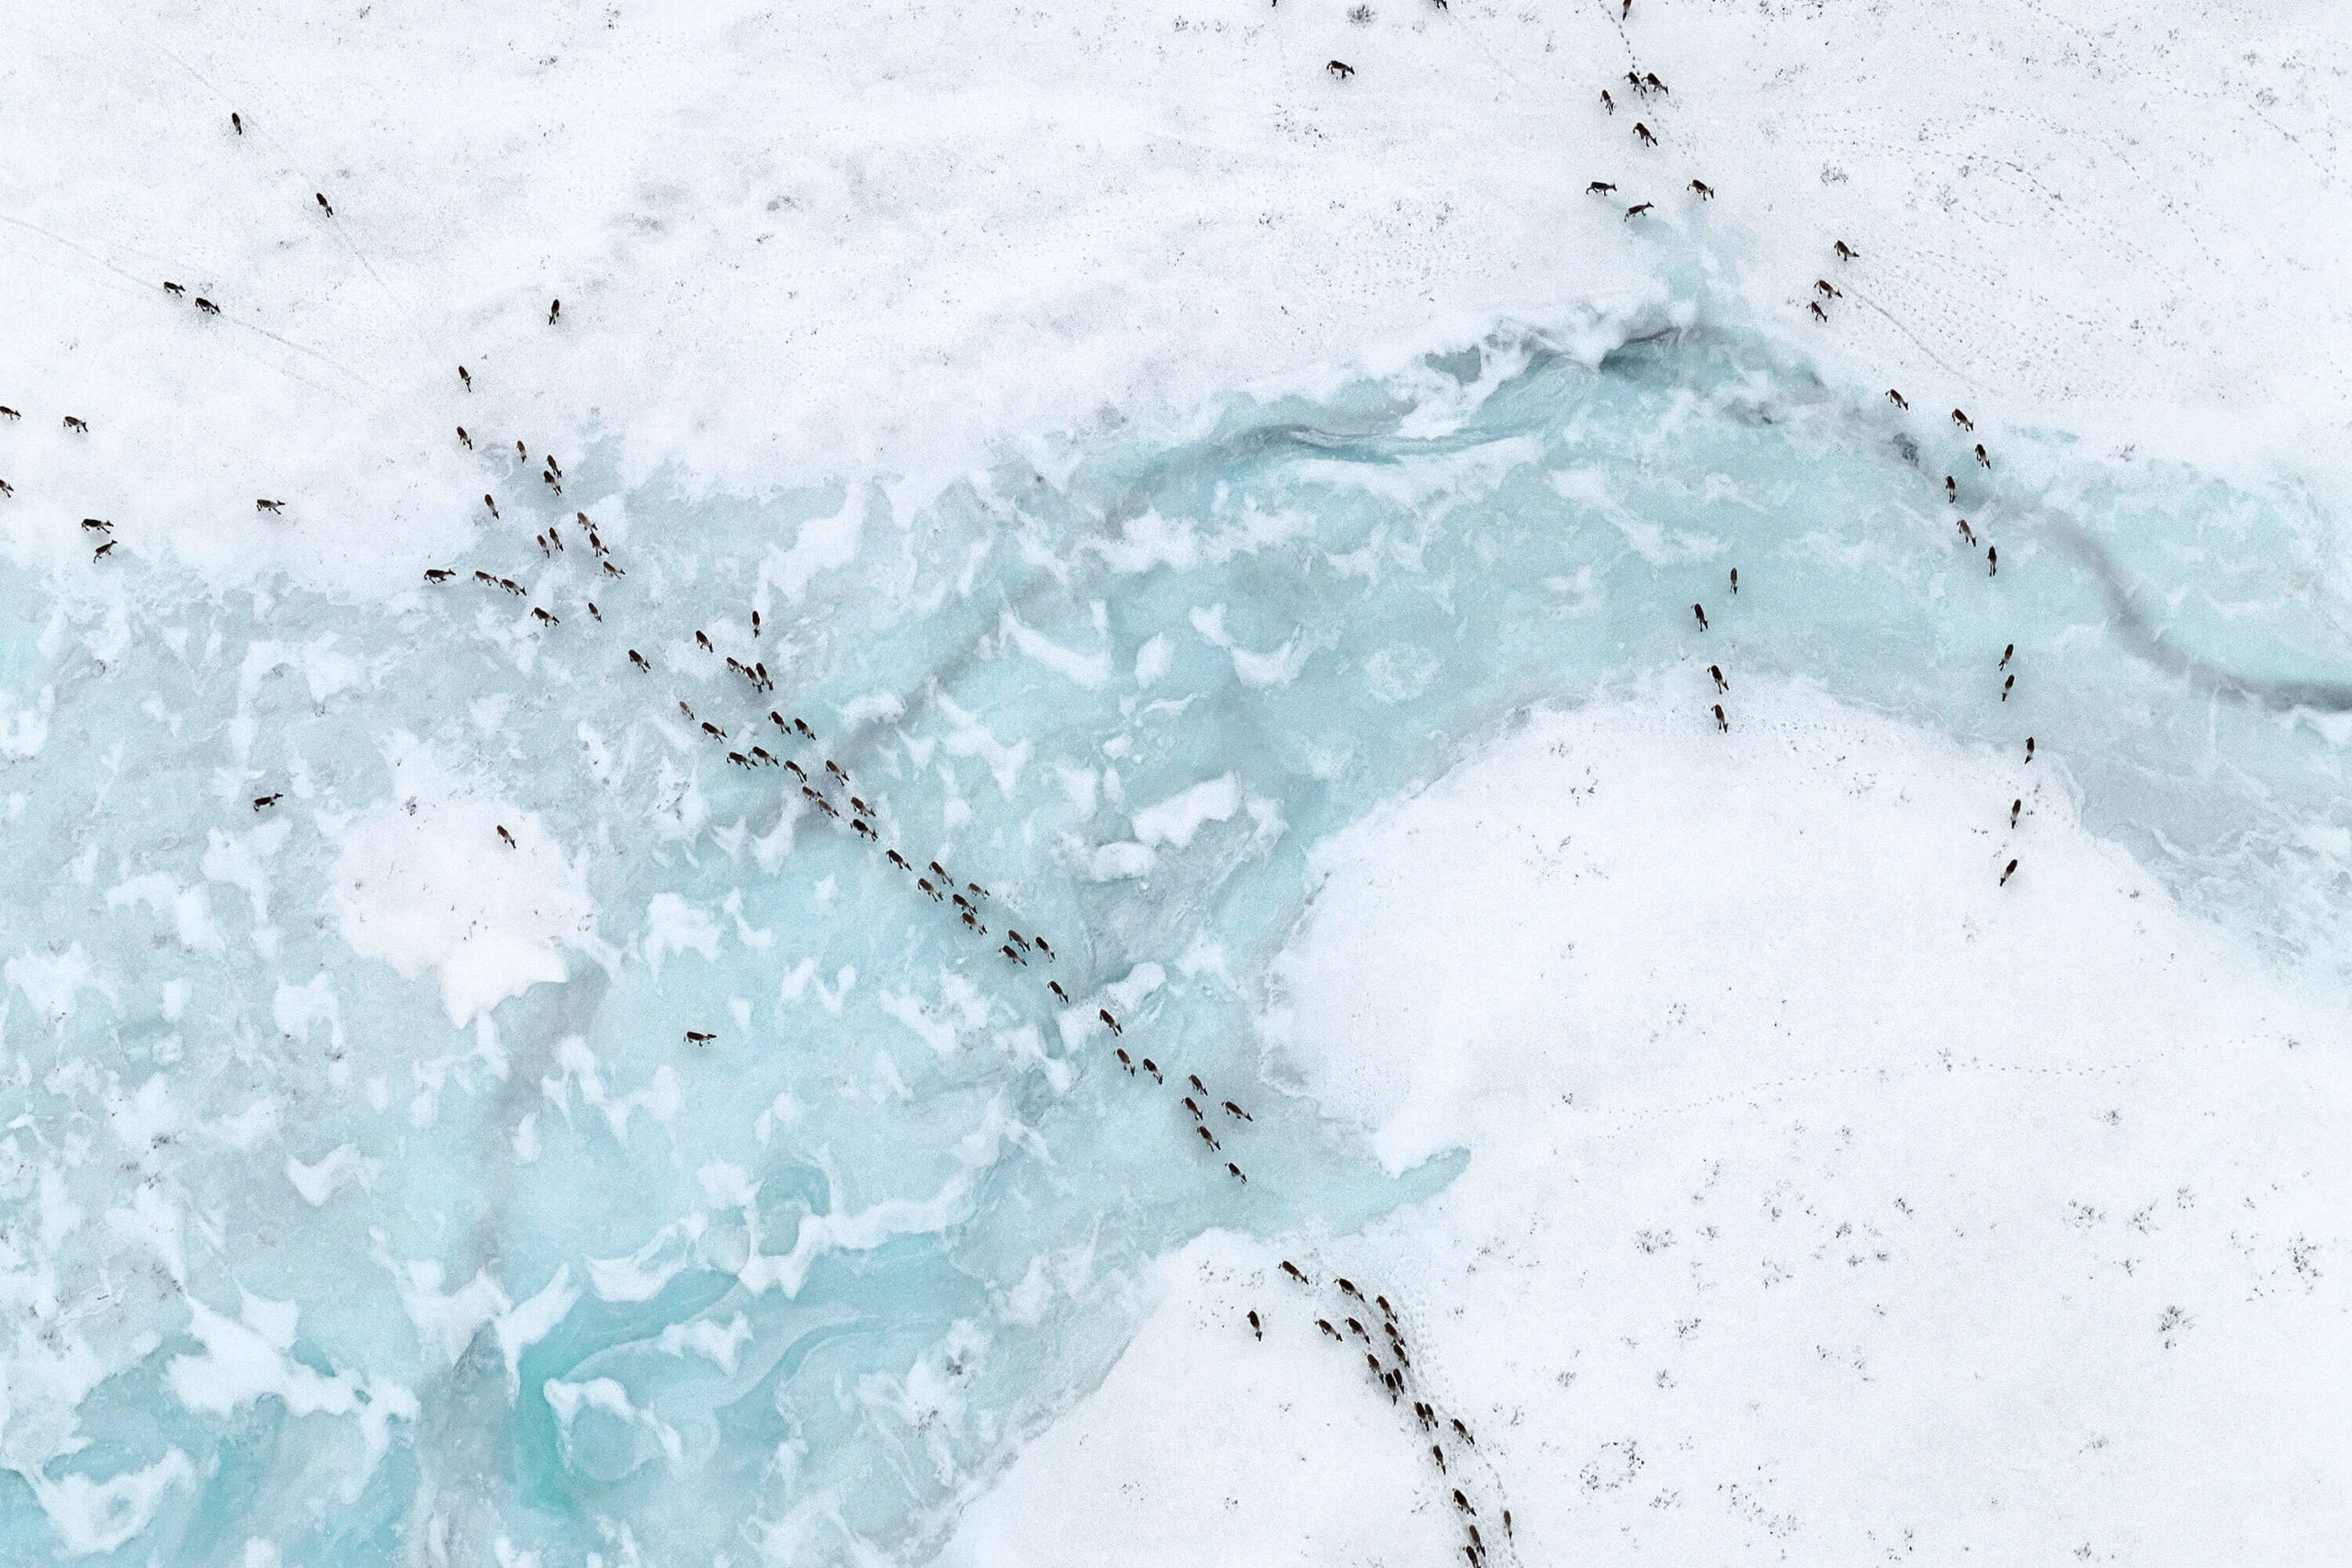 Aerial image of caribou herd migrating on snow and ice